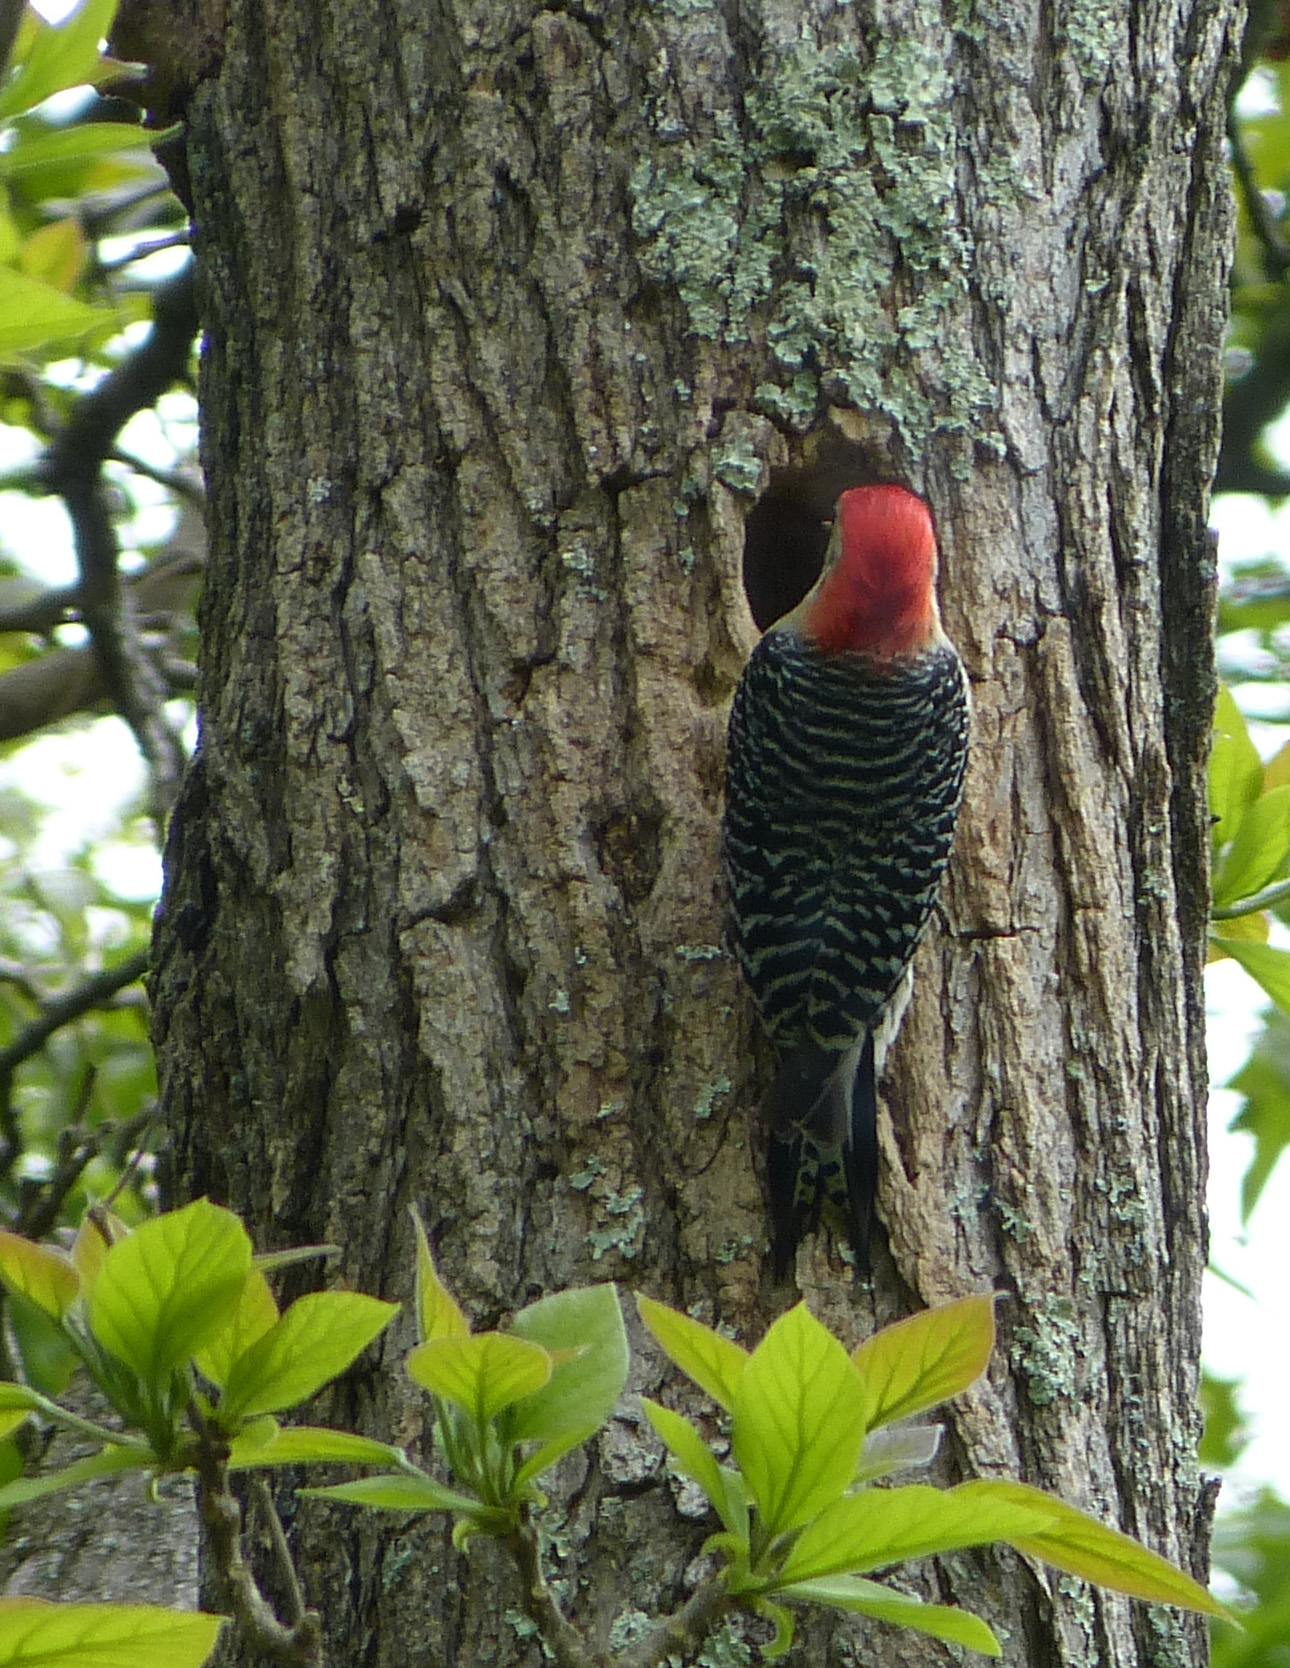 Male Red-bellied Woodpecker at nest hole